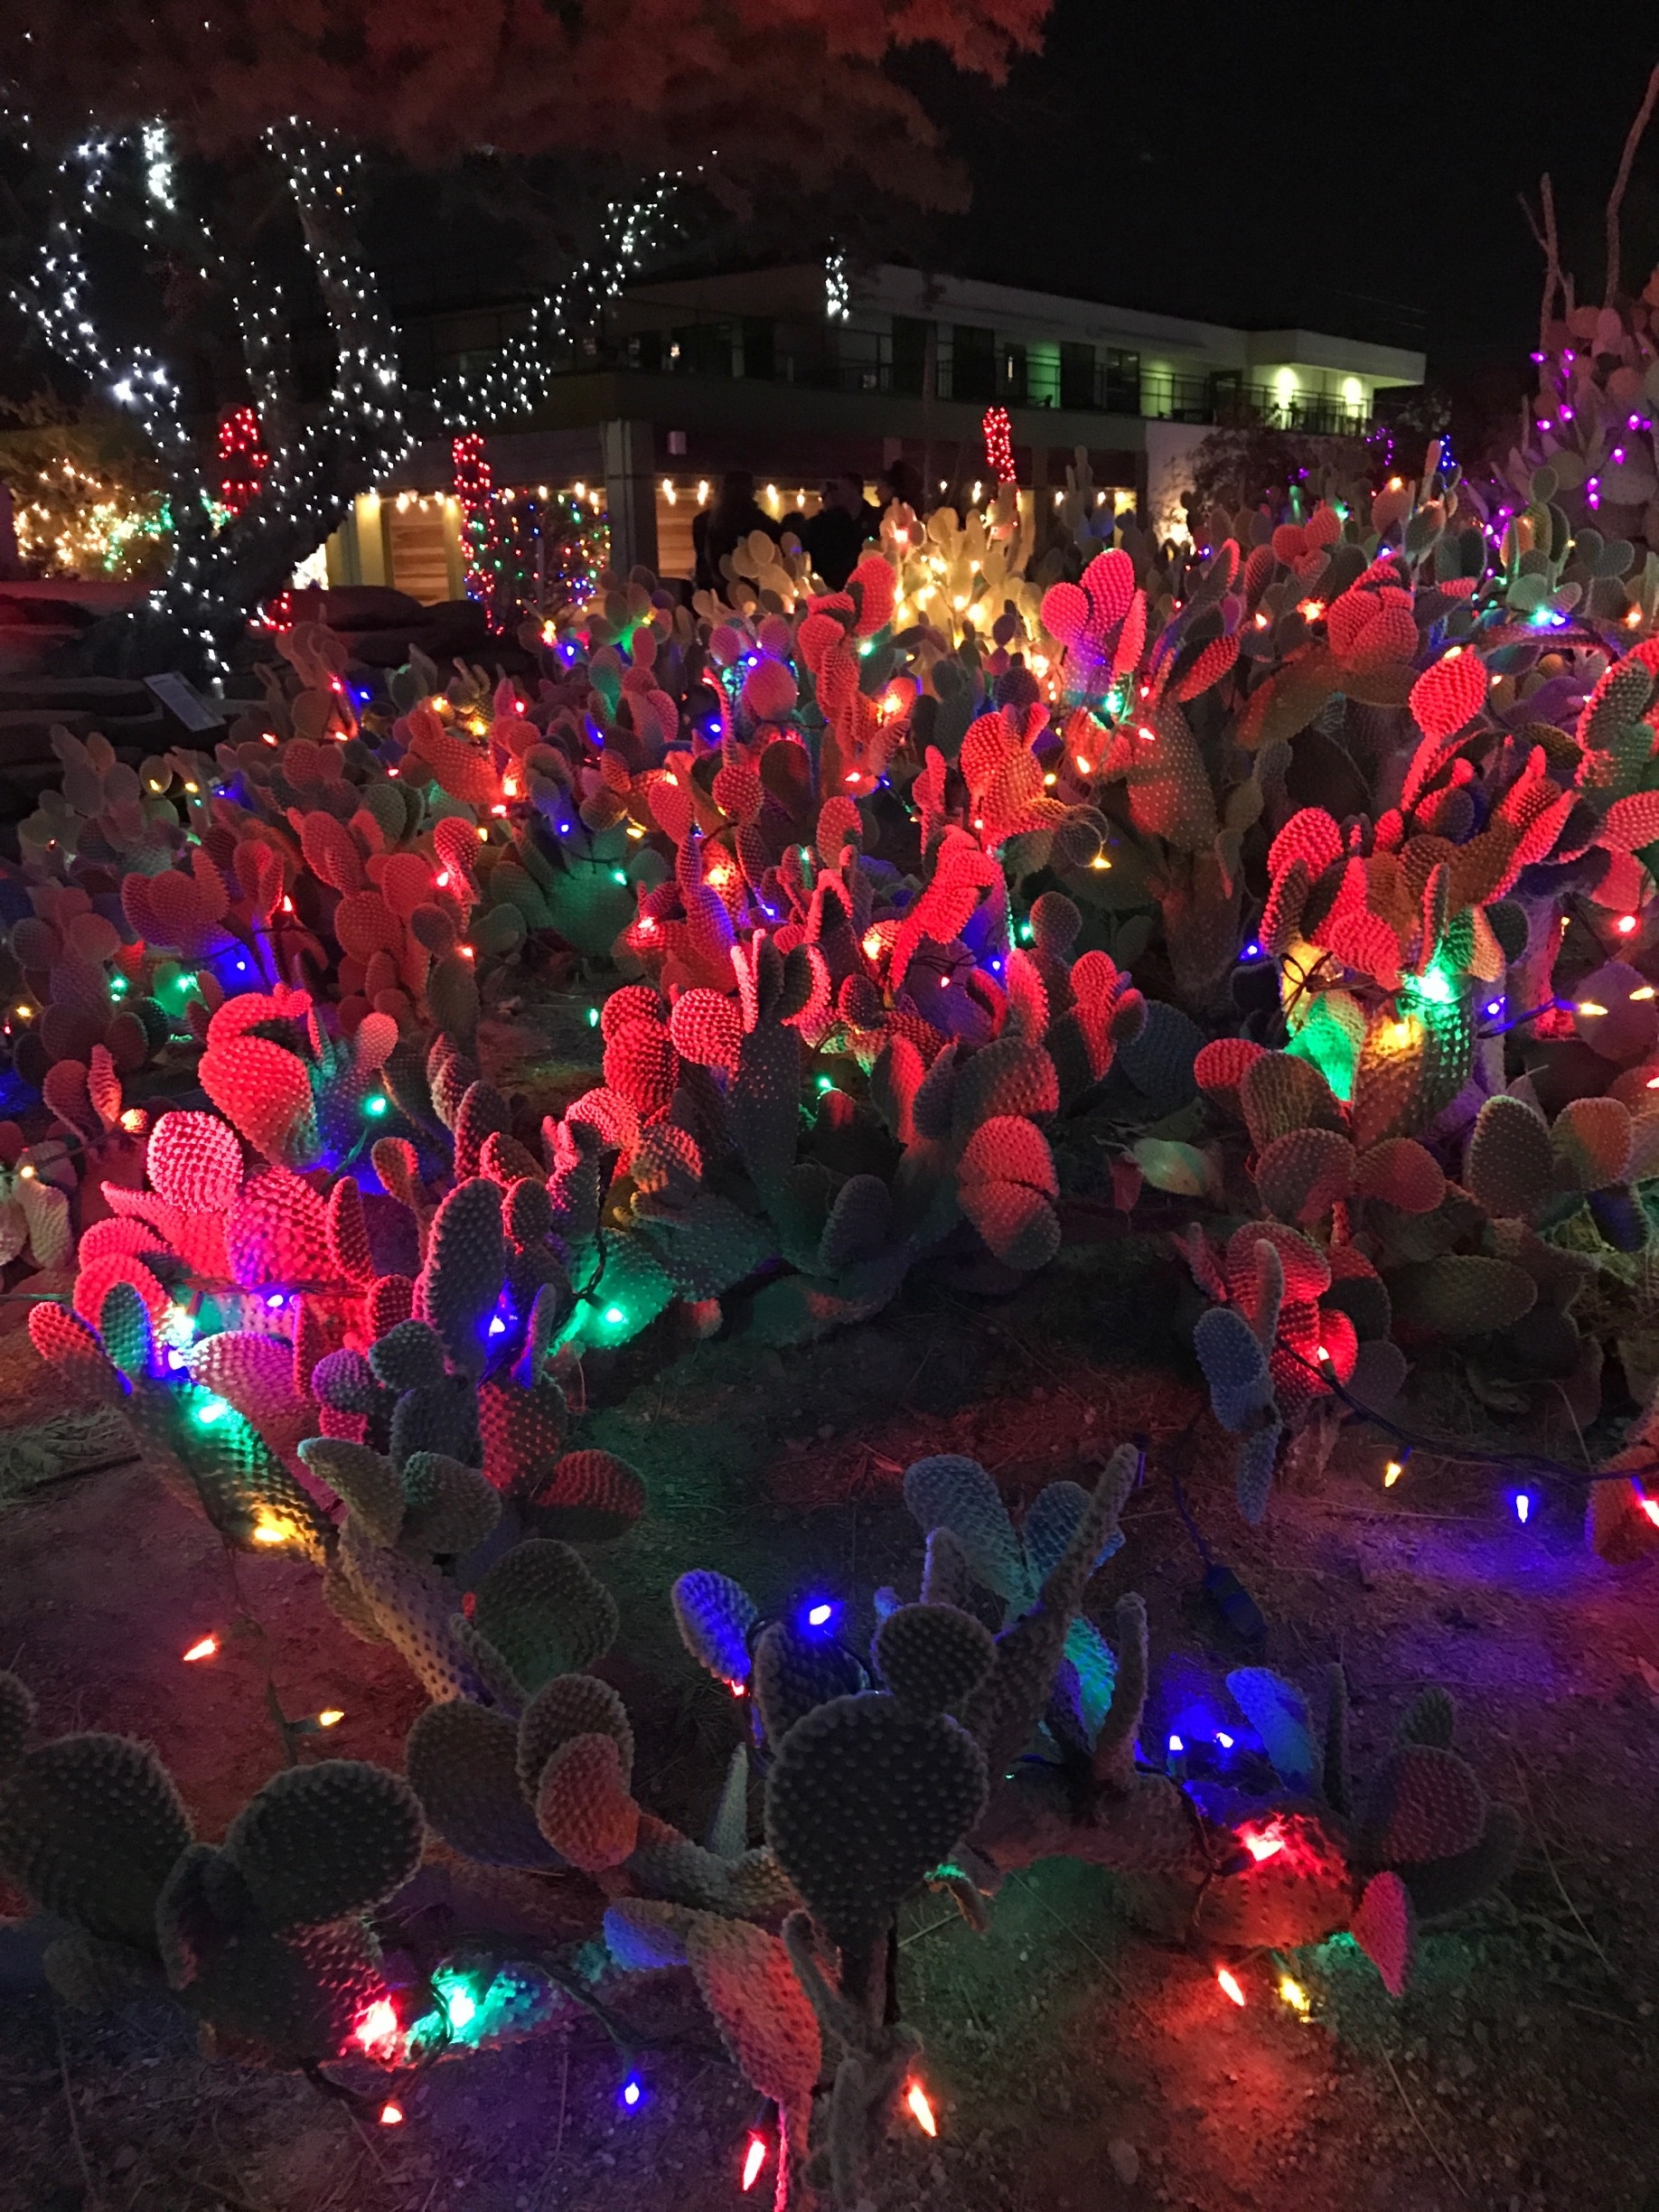 Ethel M's cactus garden will light up for the holidays